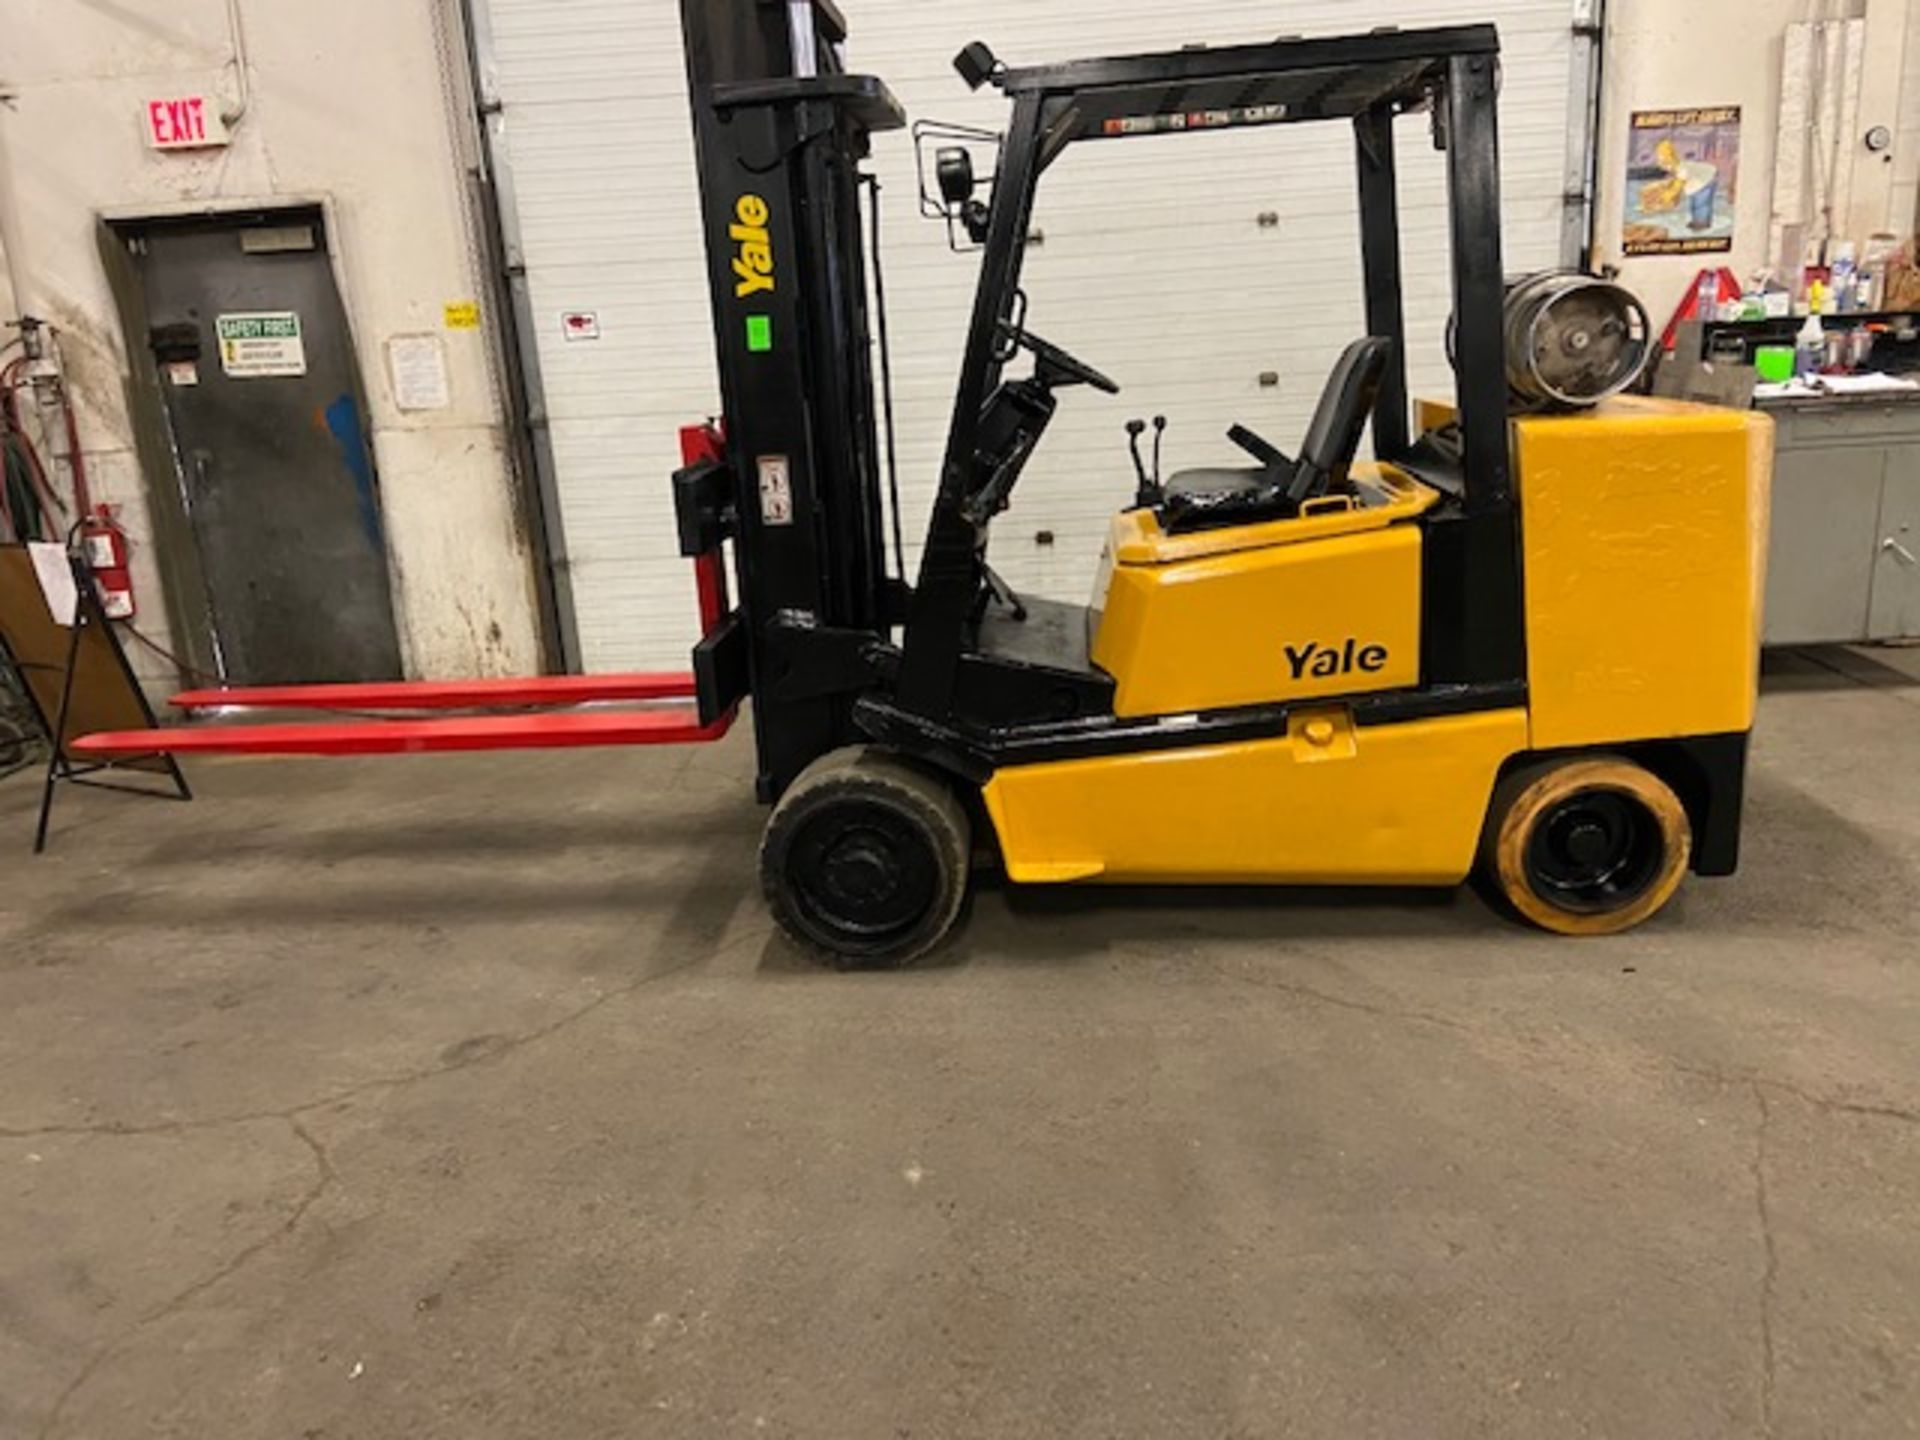 FREE CUSTOMS - Yale 10000lbs Forklift with 72" forks MINT UNIT LPG (propane) (no tank included)